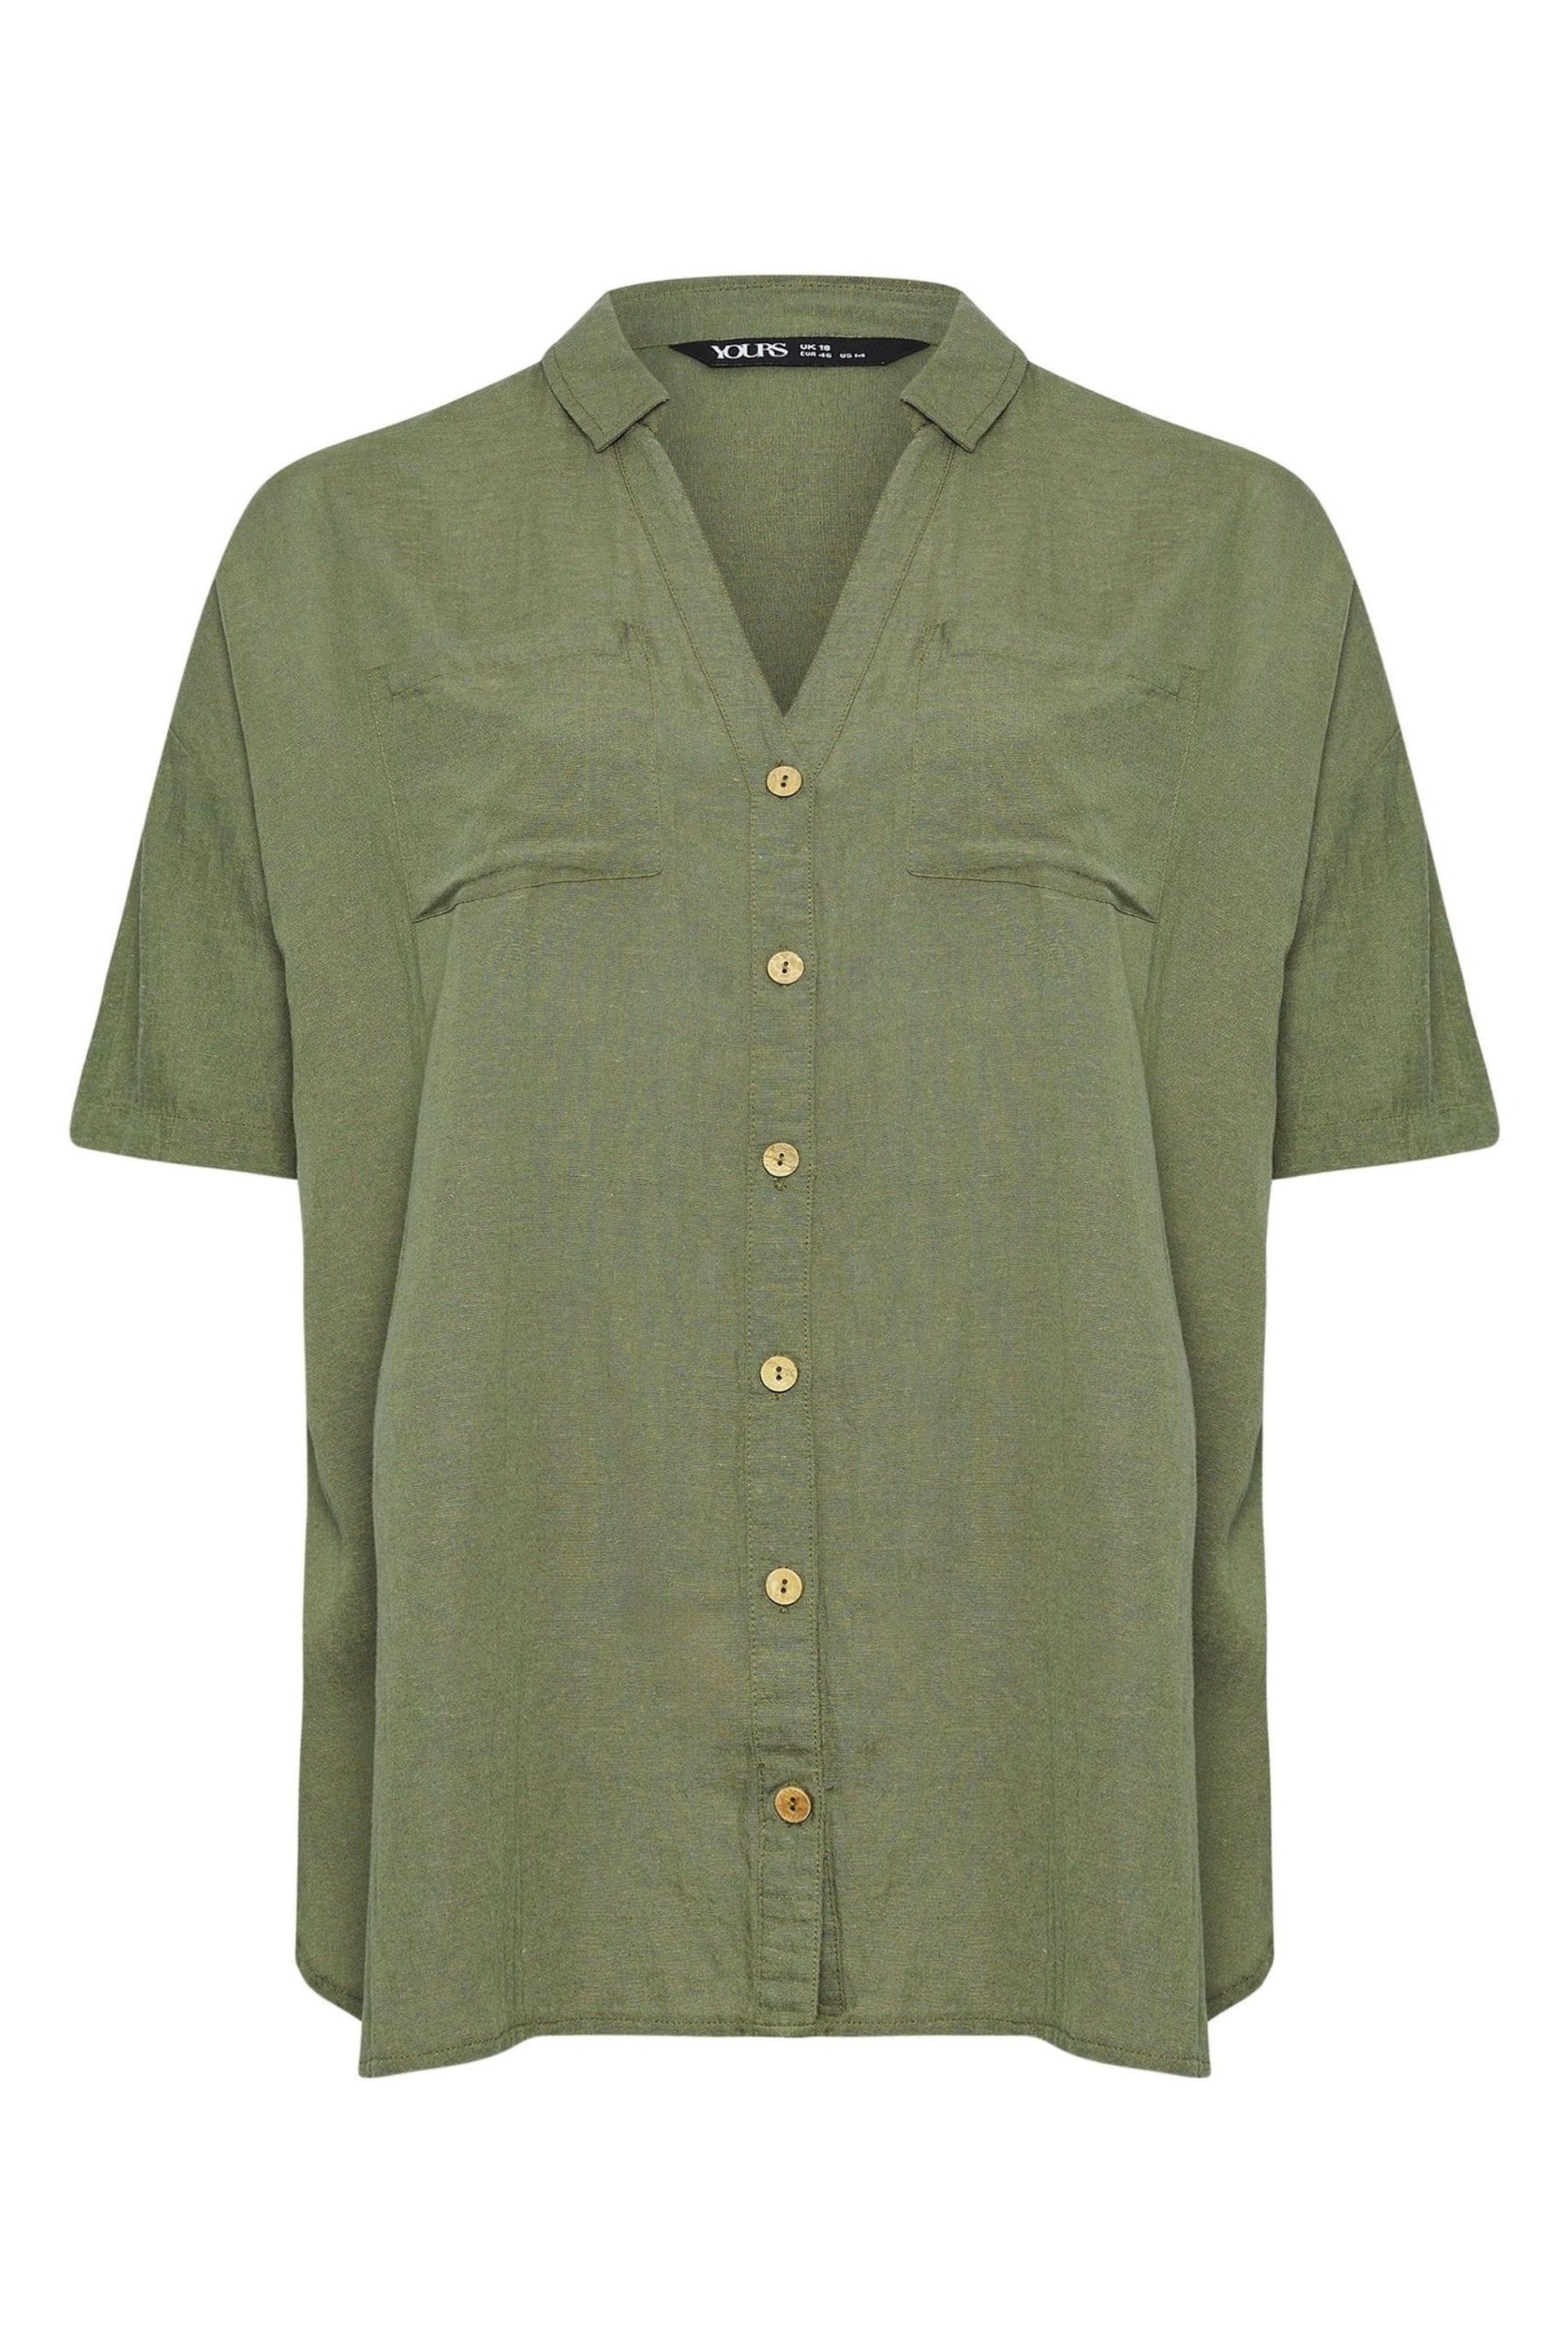 Yours Curve Khaki Green Utility Linen Shirt - Image 5 of 5